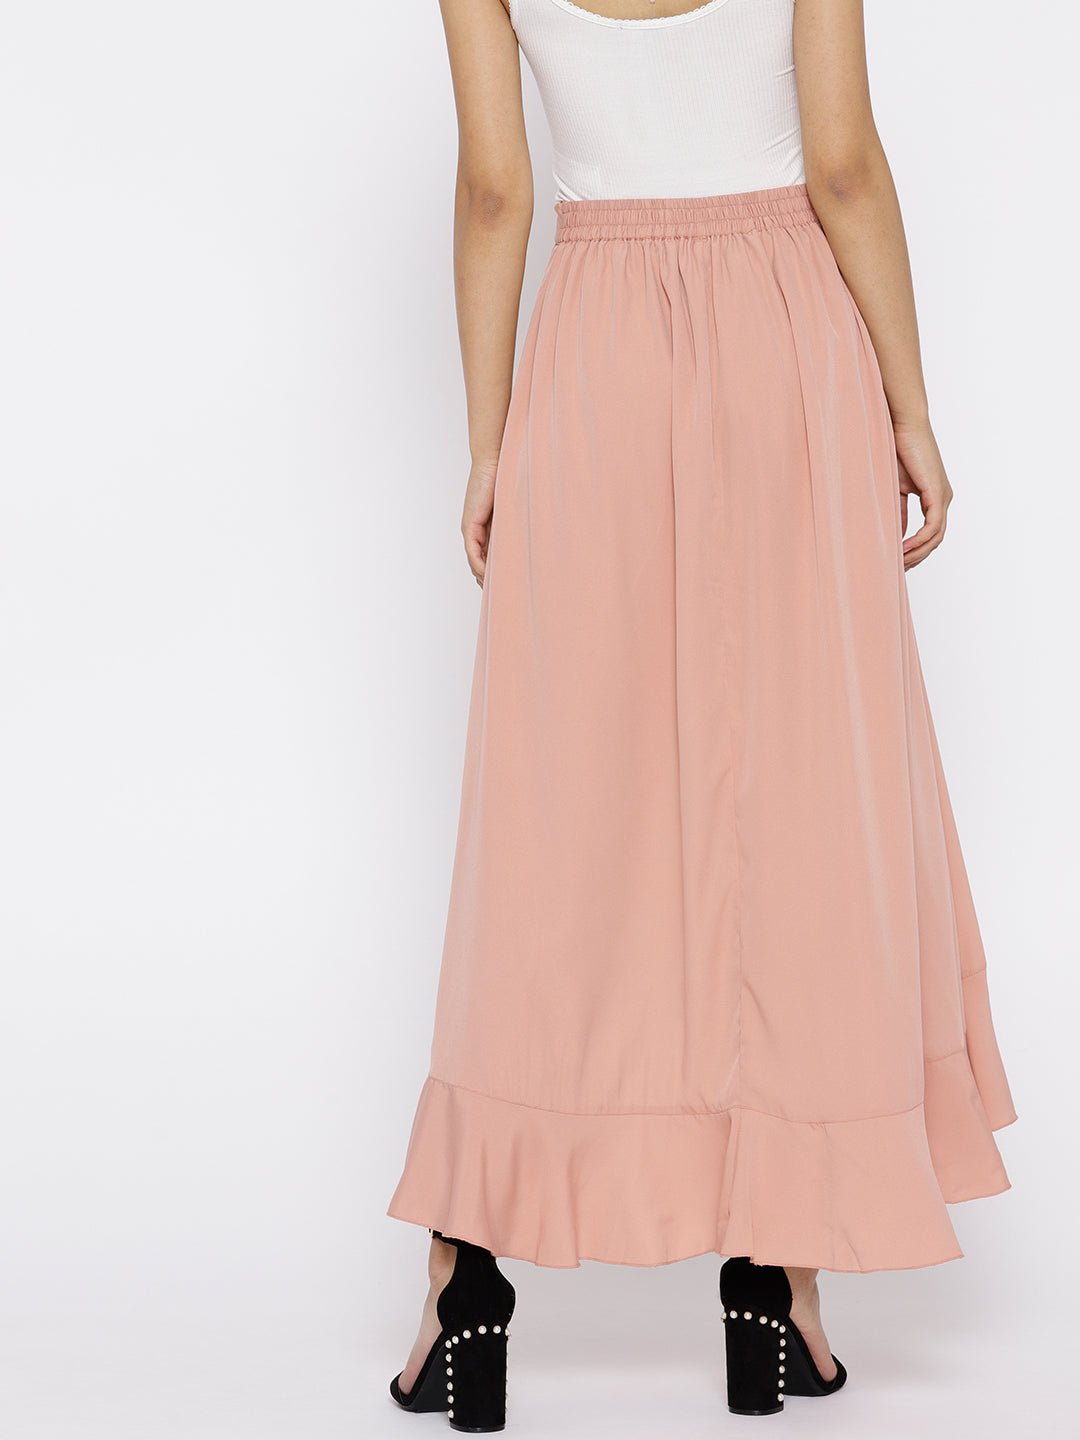 Folk Republic Women Solid Dusty Pink Waist Tie-Up Ruffled Maxi Skirt with Attached Trousers - #folk republic#